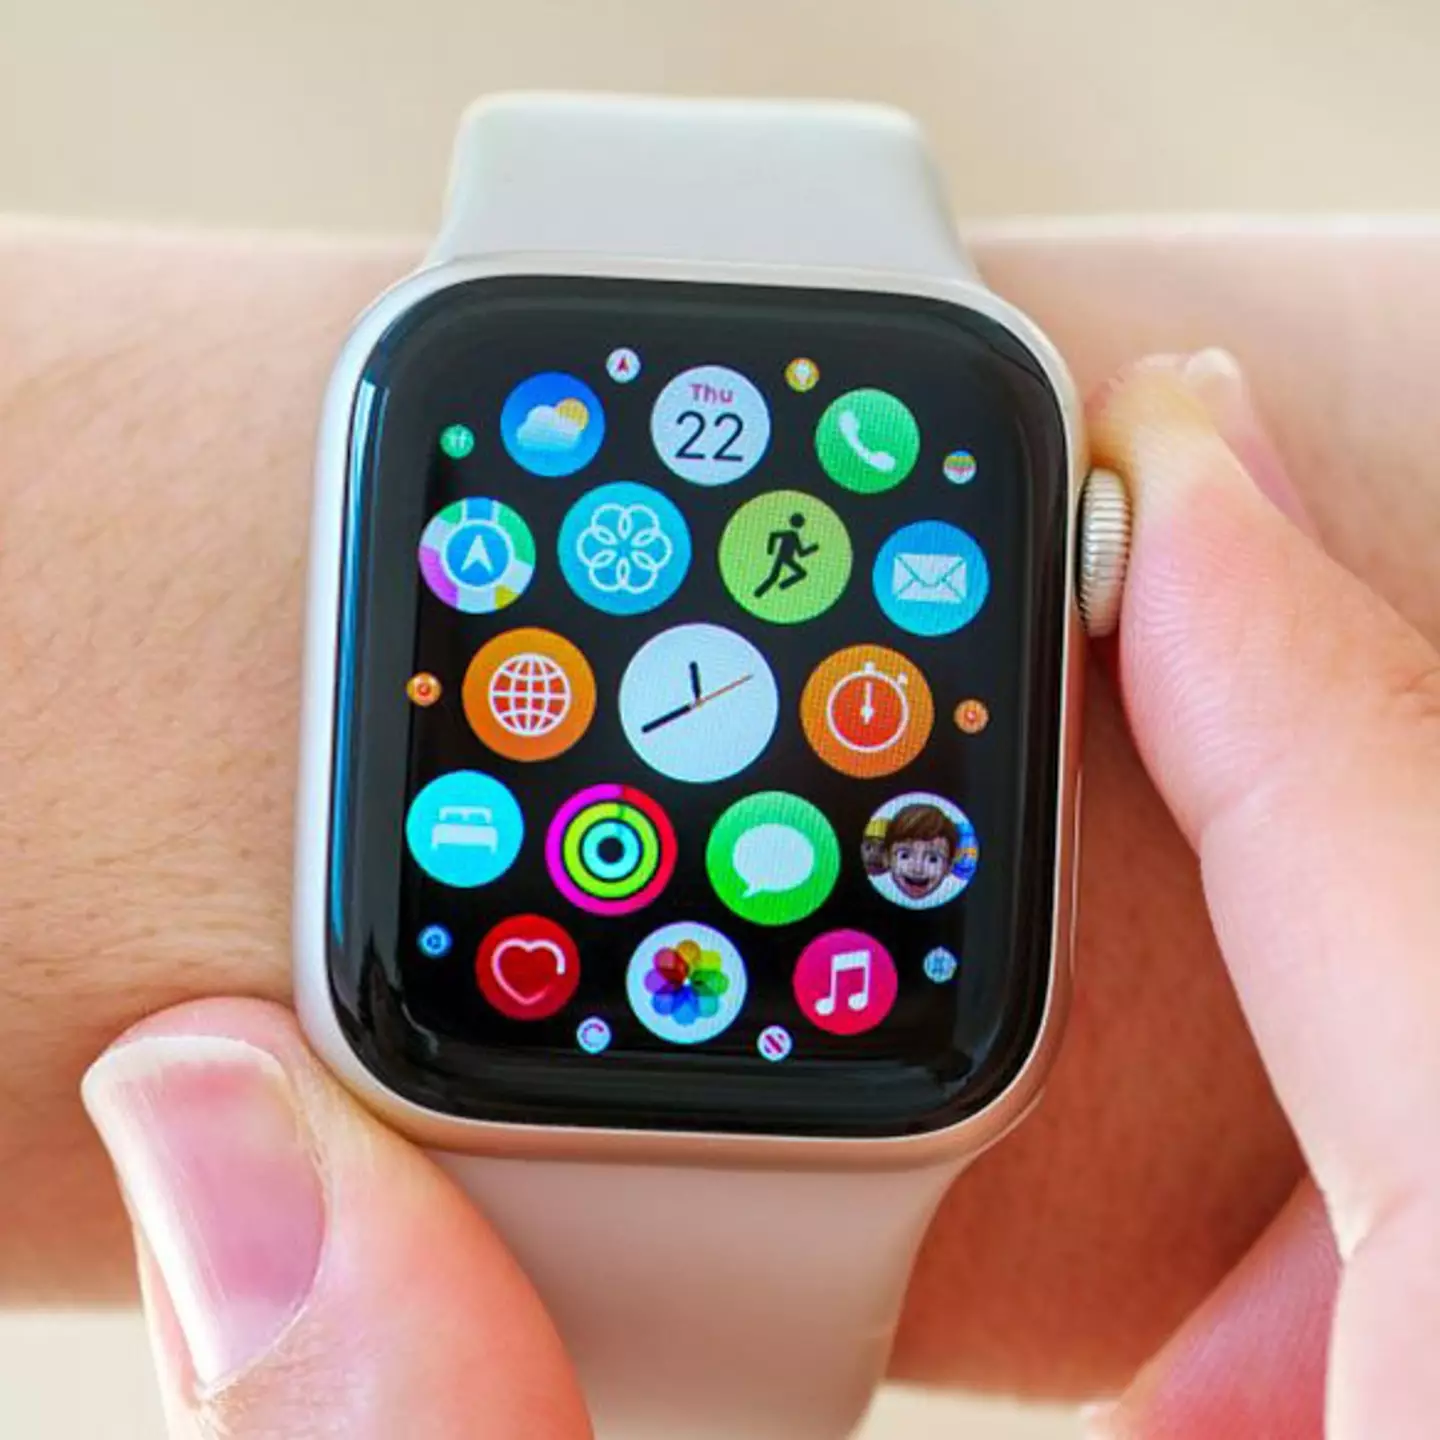 Fans react to Apple finally adding feature to Apple Watch after nine year wait